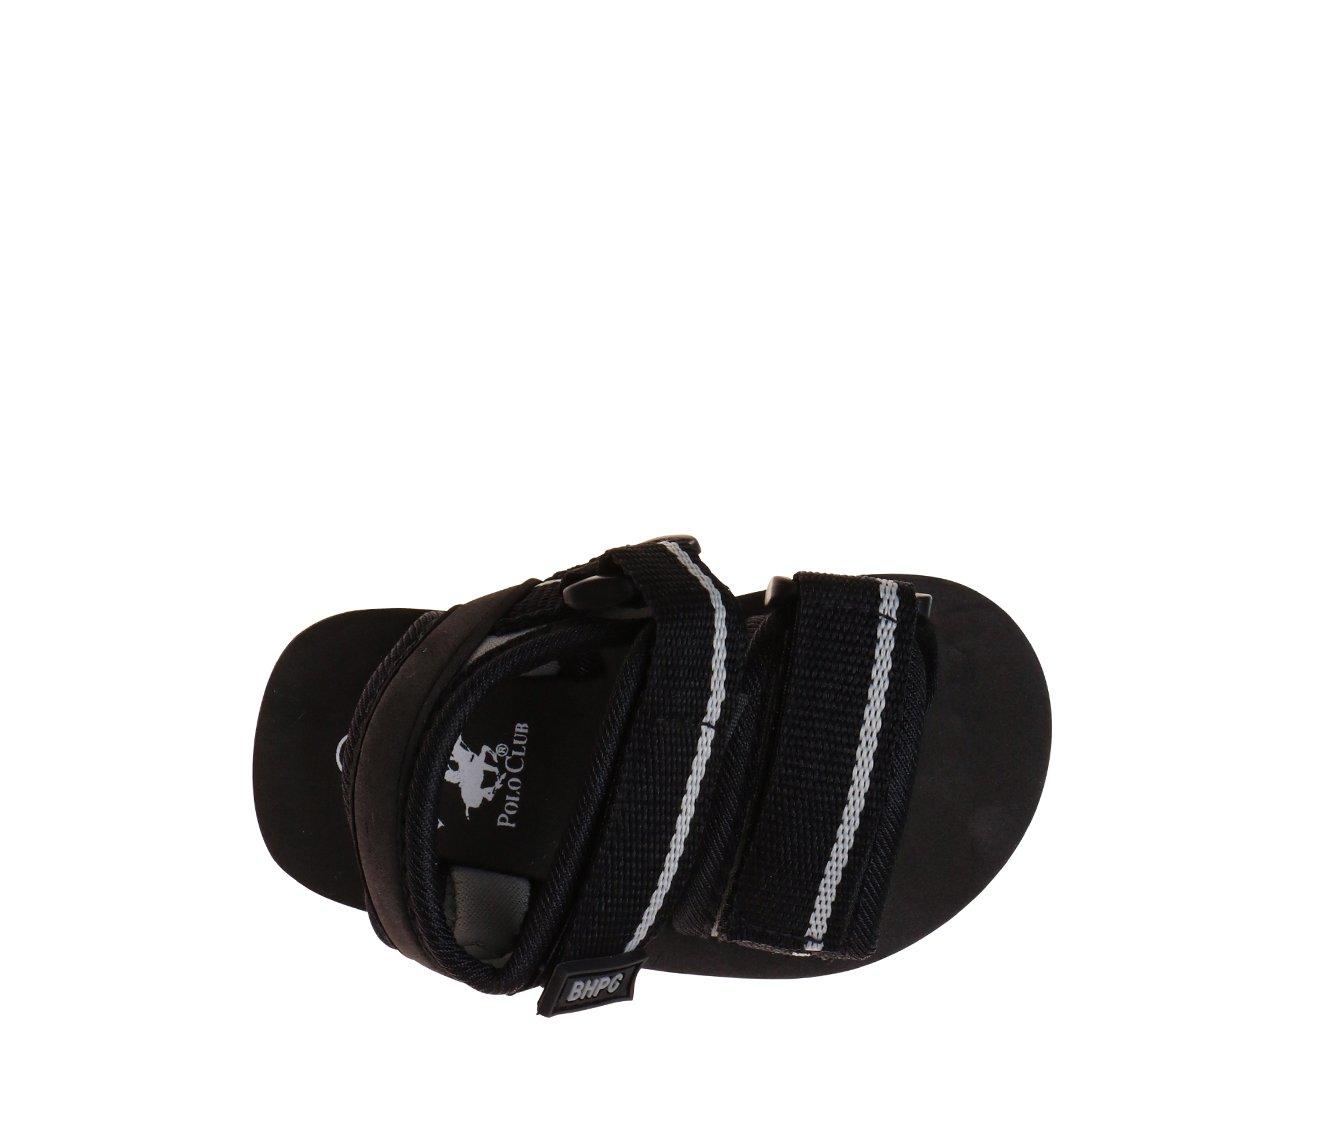 Boys' Beverly Hills Polo Club Toddler Swallow Sandals